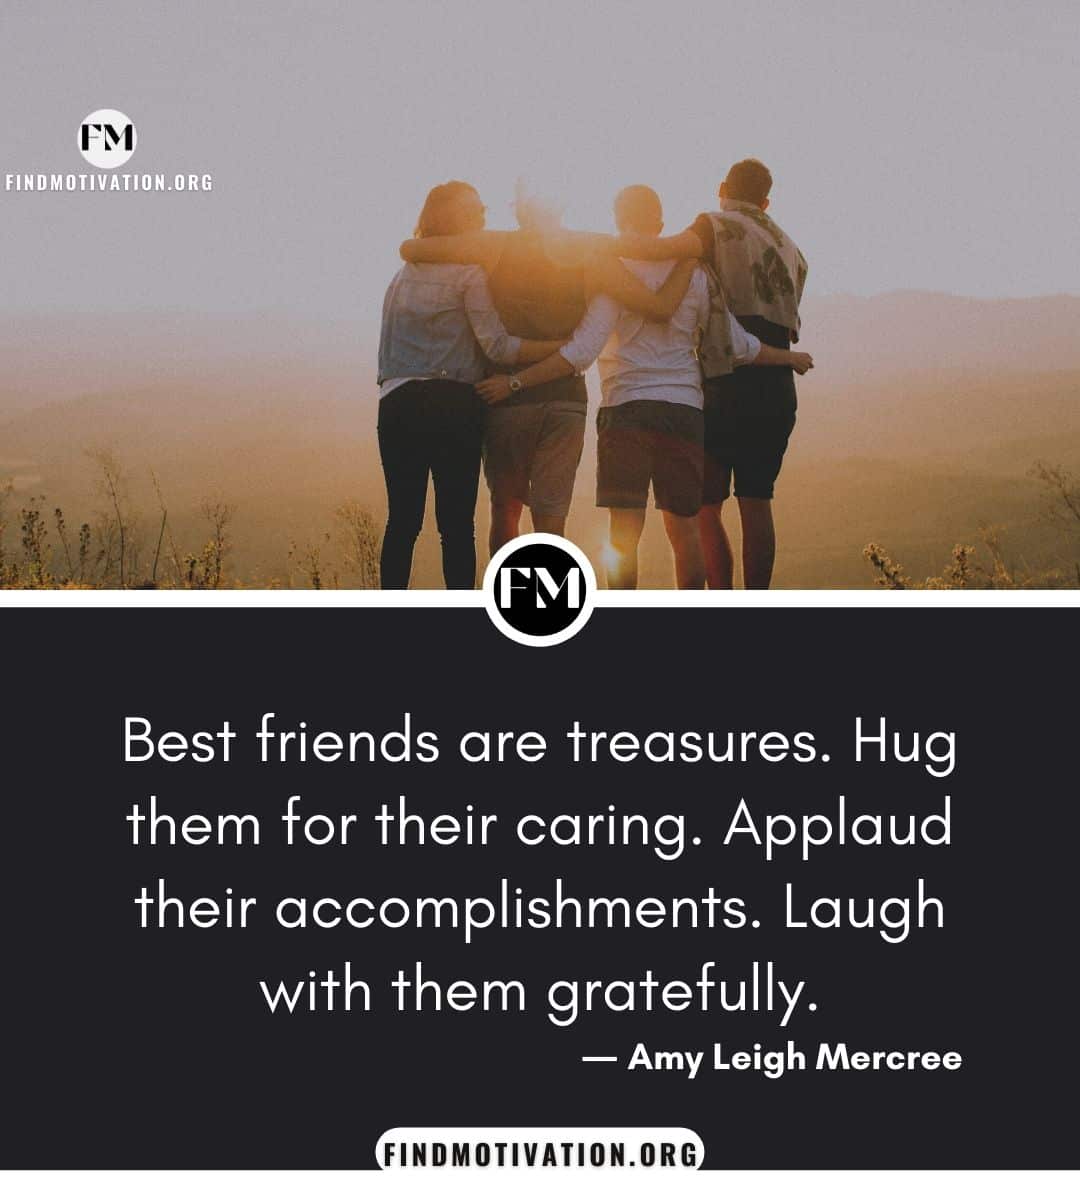 Positive quotes about friendship with motivational tips to be happy if you have a real friend with you